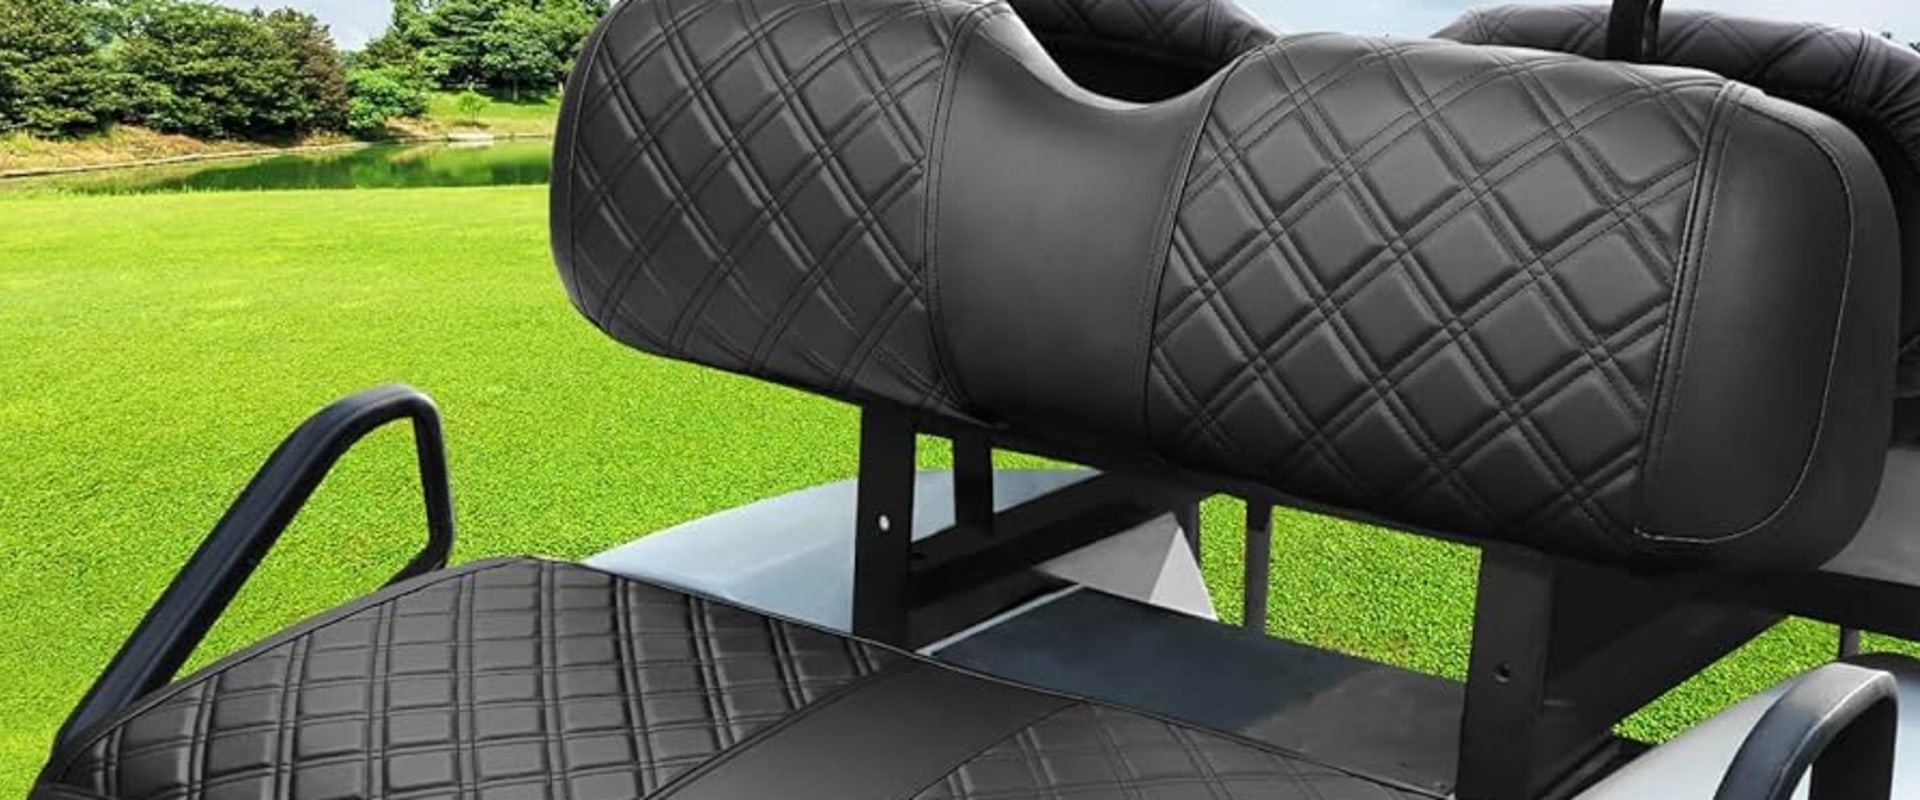 Considerations for Choosing the Perfect Golf Cart Seat Cover